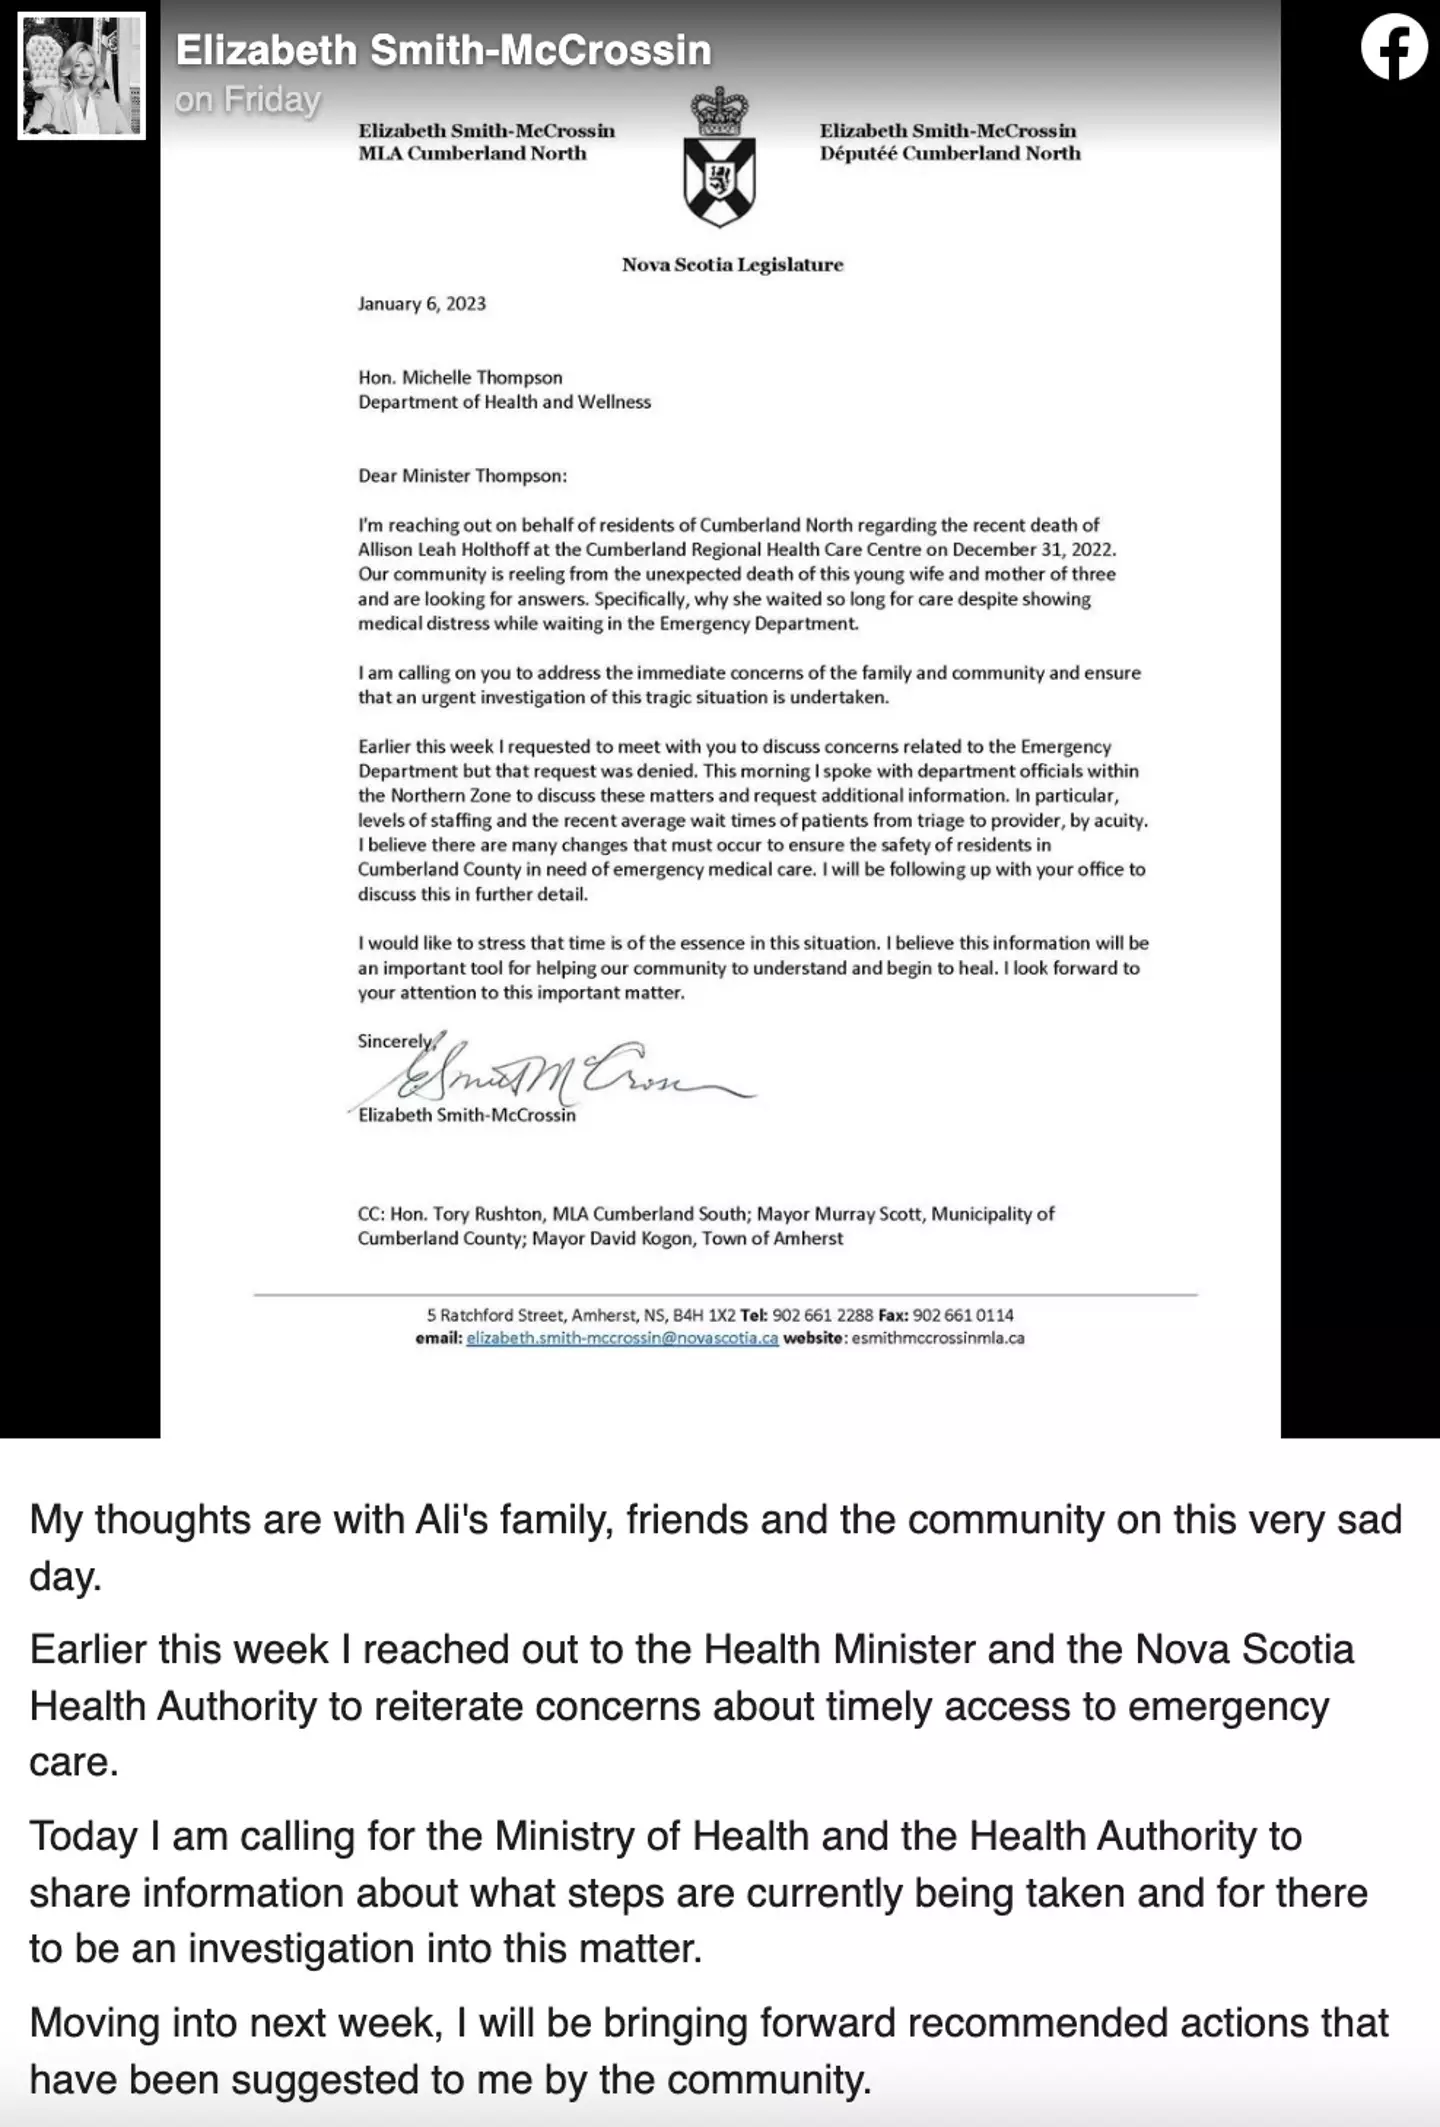 Elizabeth Smith-McCrossin has reached out to the Health Minister and Nova Scotia Health Authority to express concerns about emergency care.